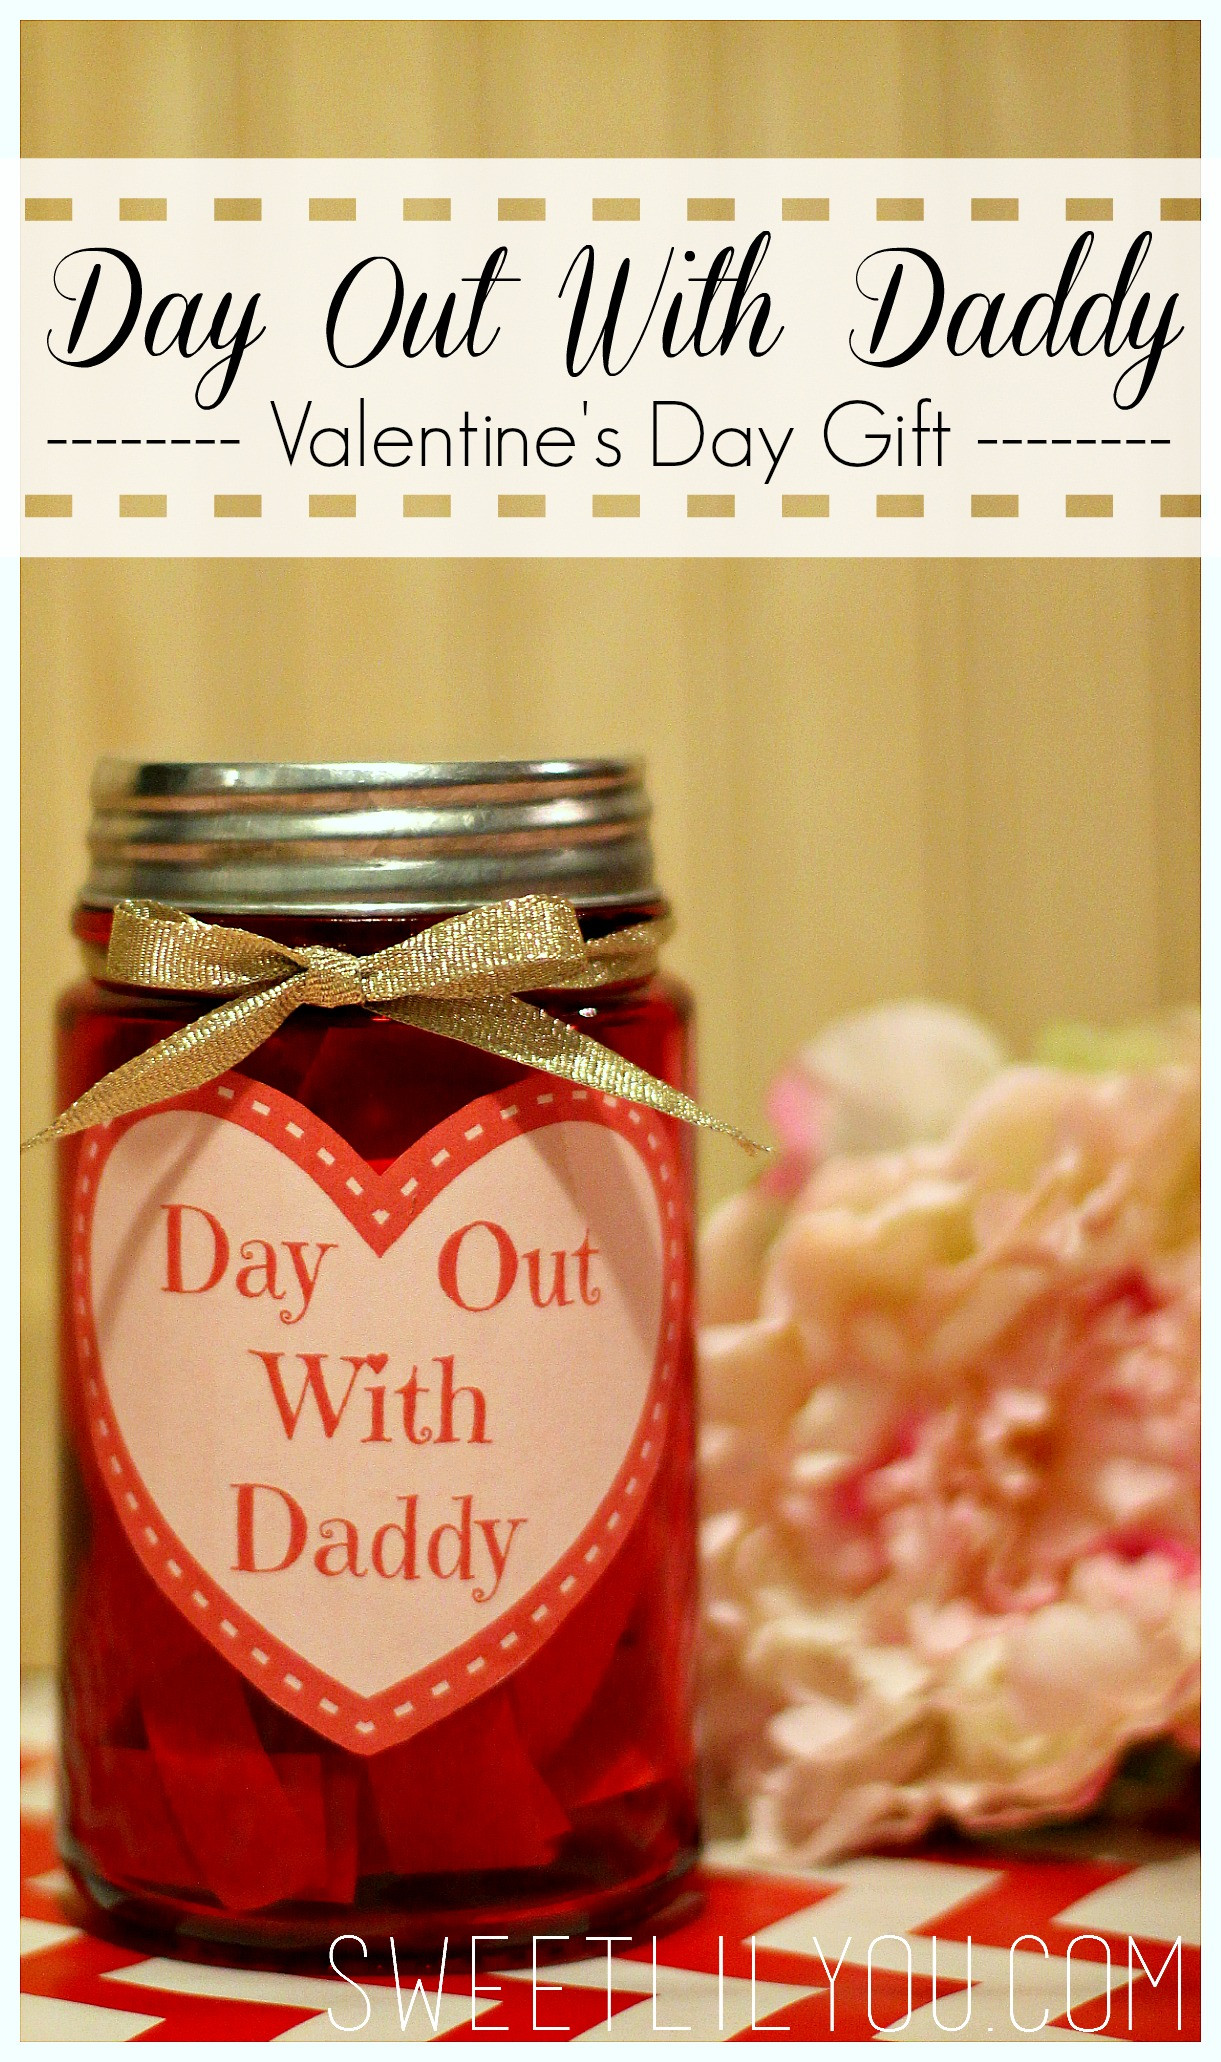 Valentines Gift Ideas For Daughter
 Day Out With Daddy Jar Valentine s Day Gift for Dad